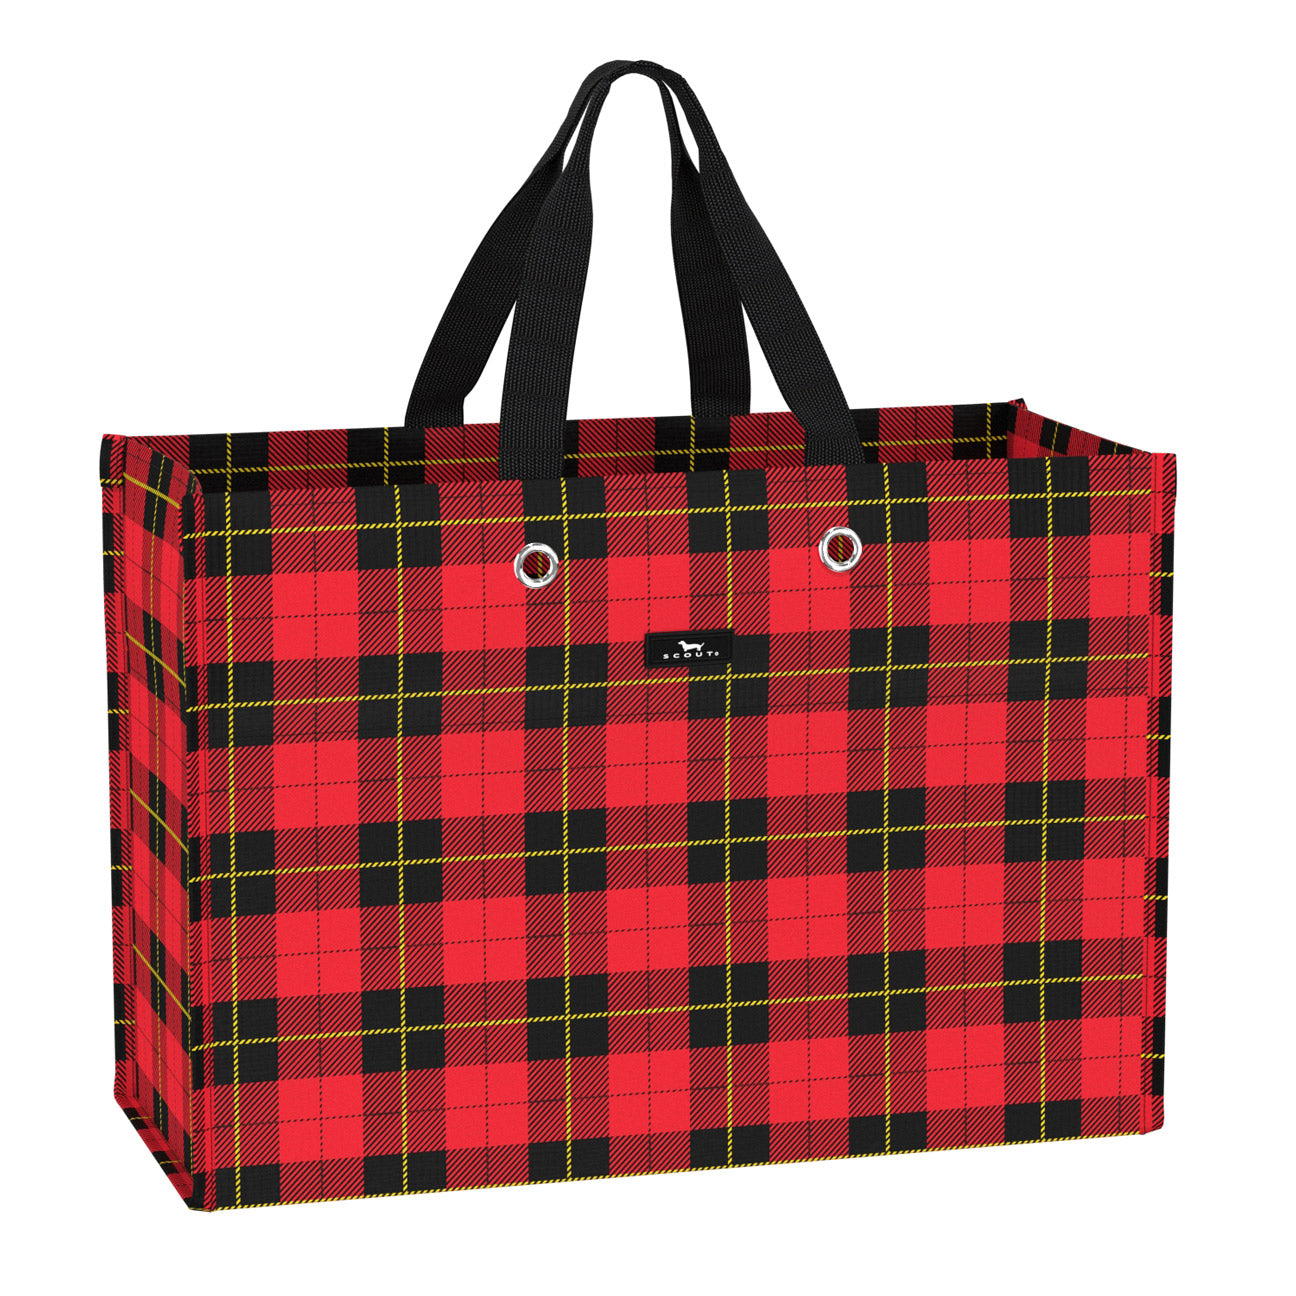 X-Large Package Gift Bag